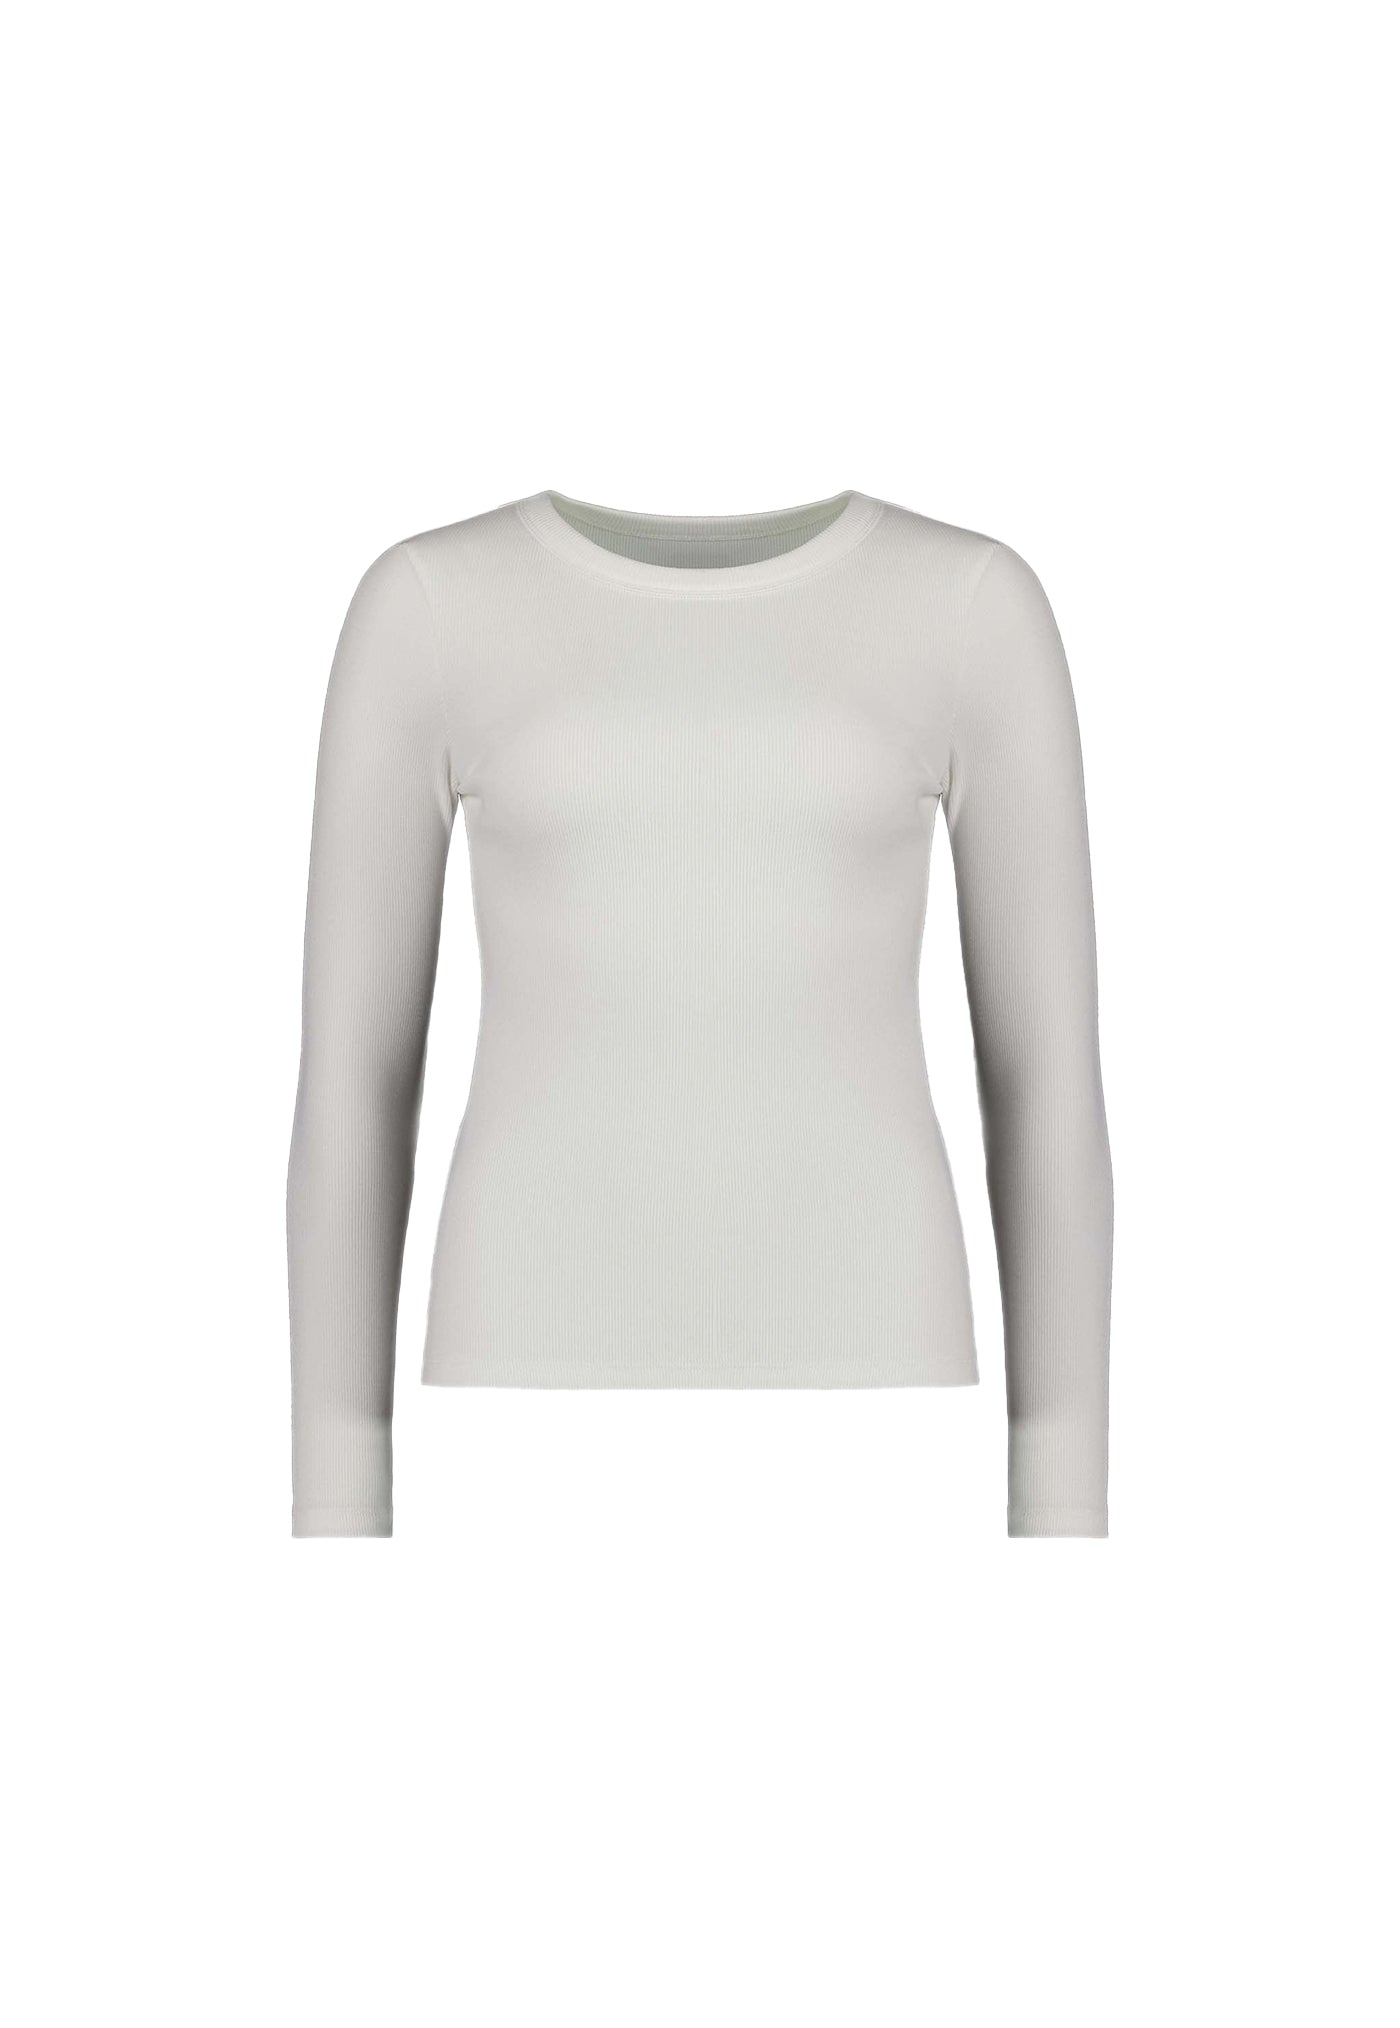 CC Essential Long Sleeve - White Rib sold by Angel Divine